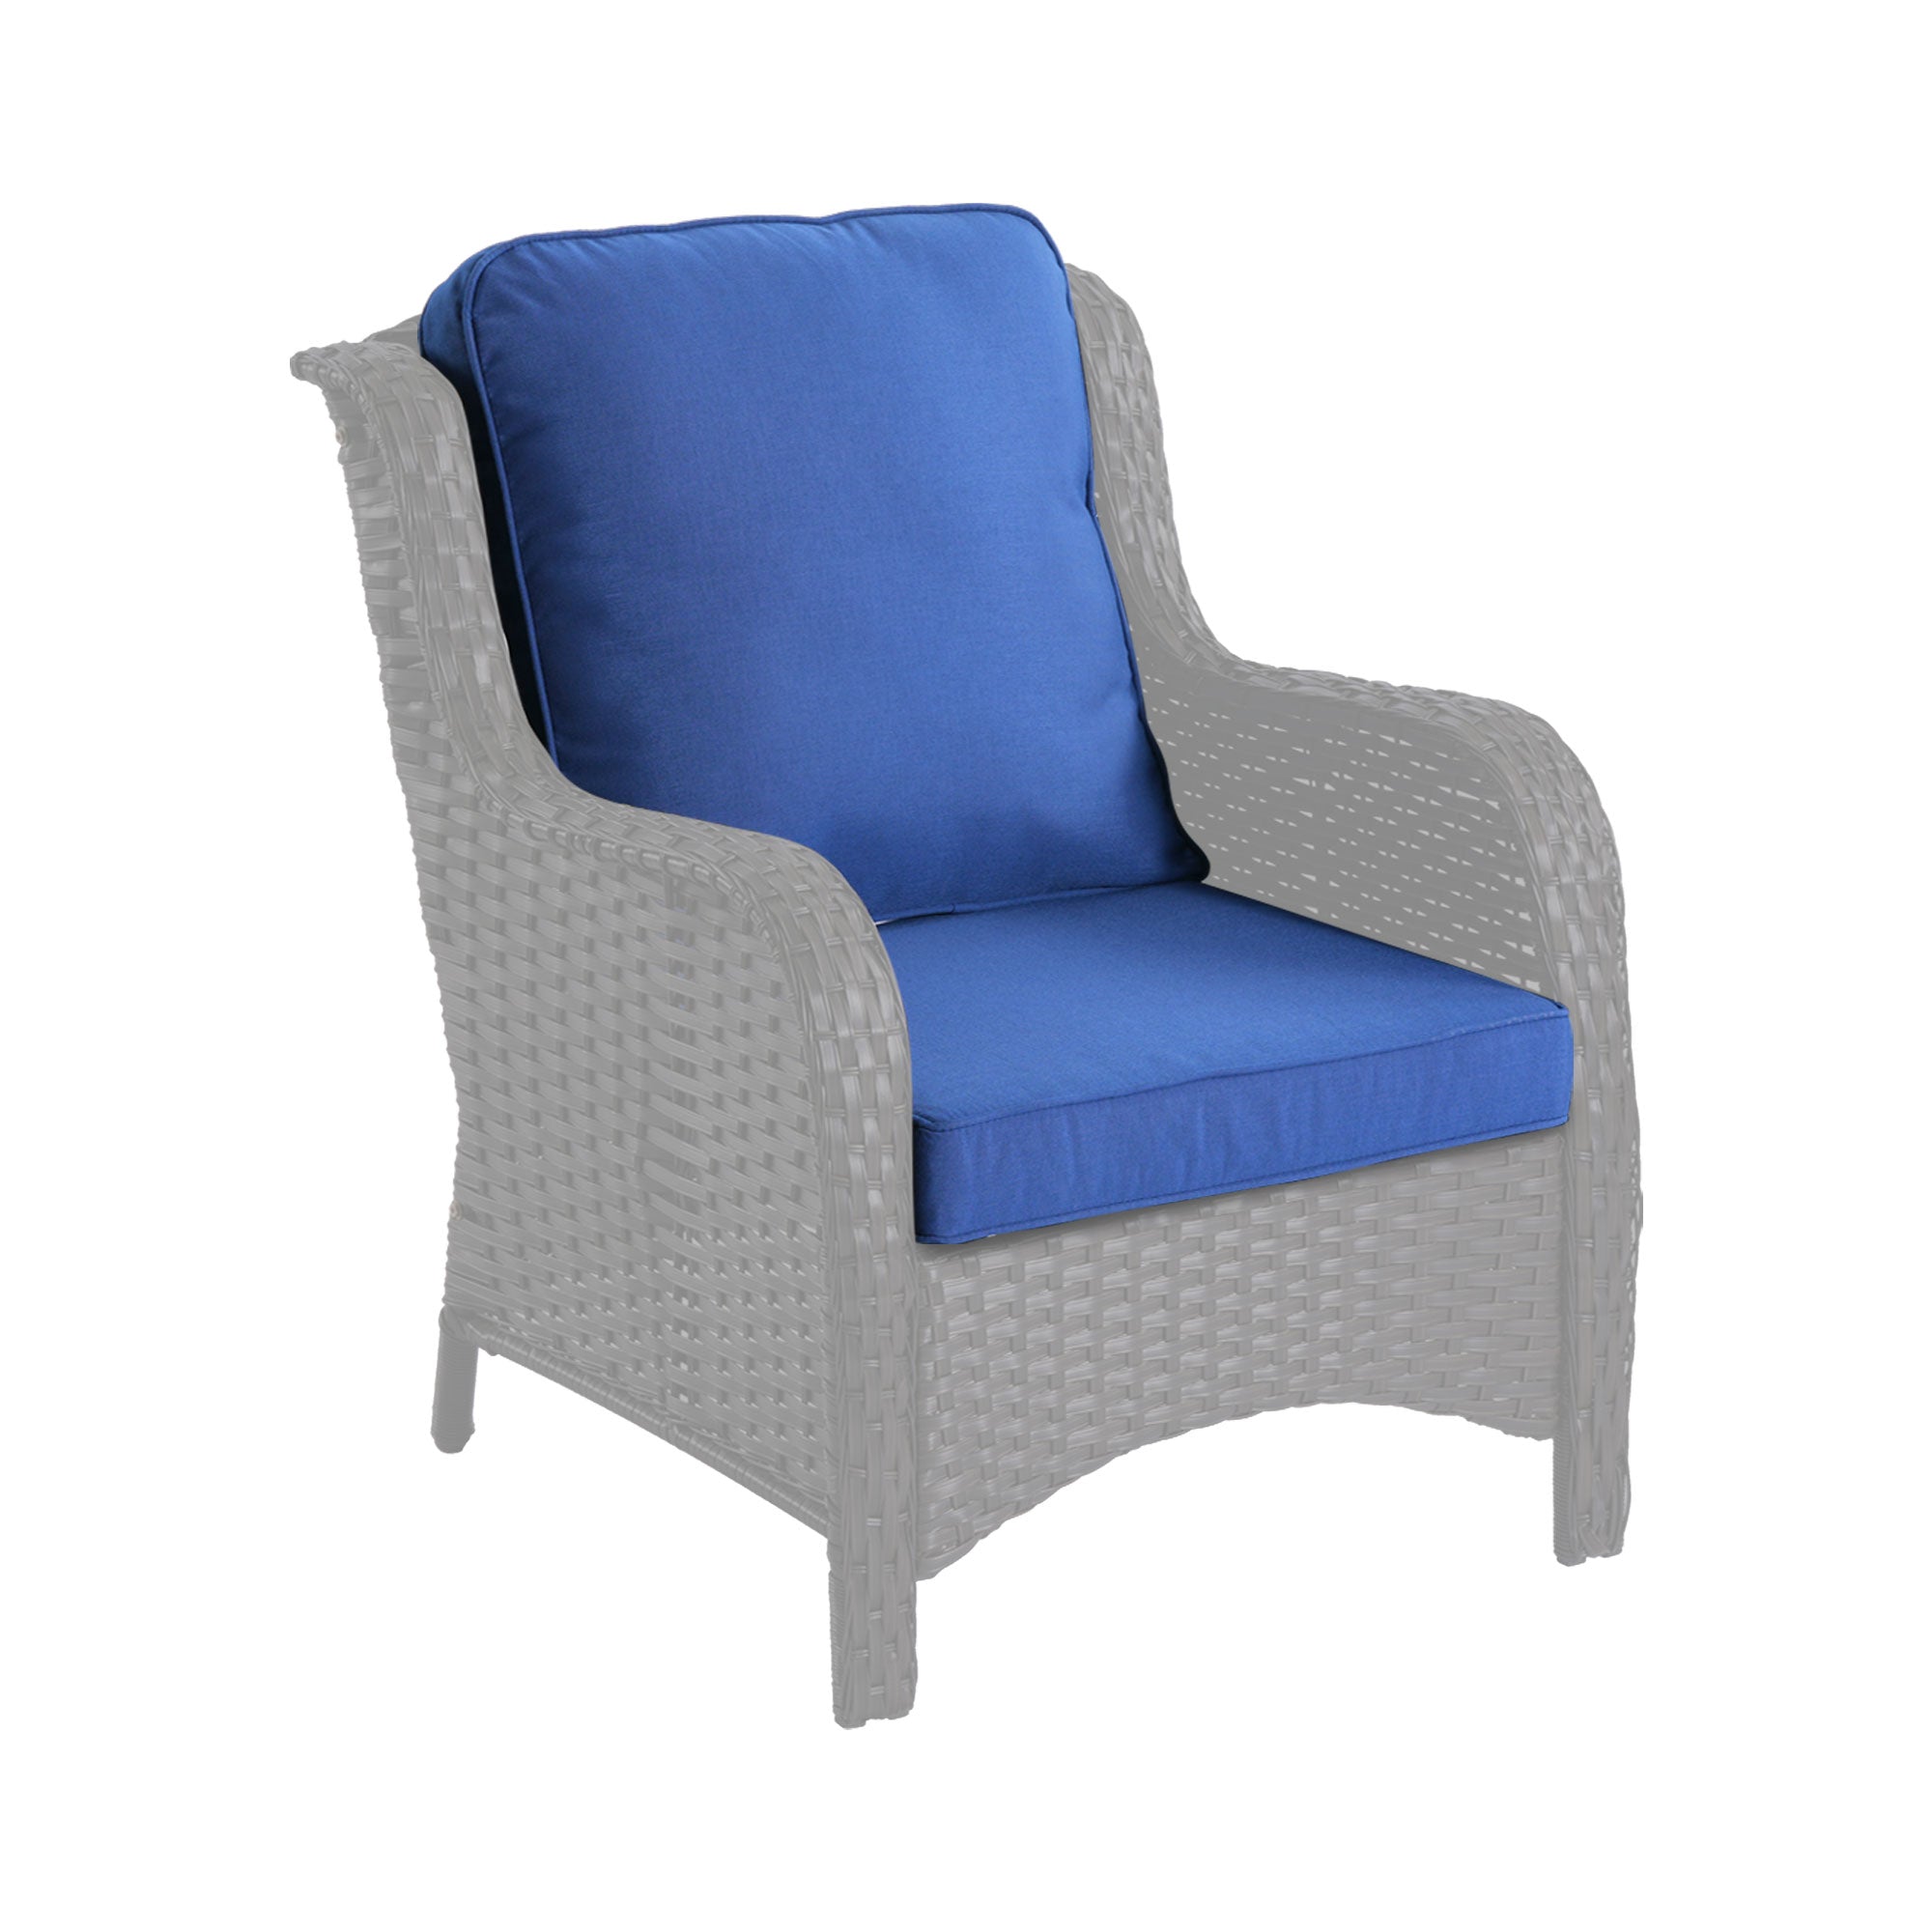 #Color_Navy Blue|Type_Seat&Back Cushion